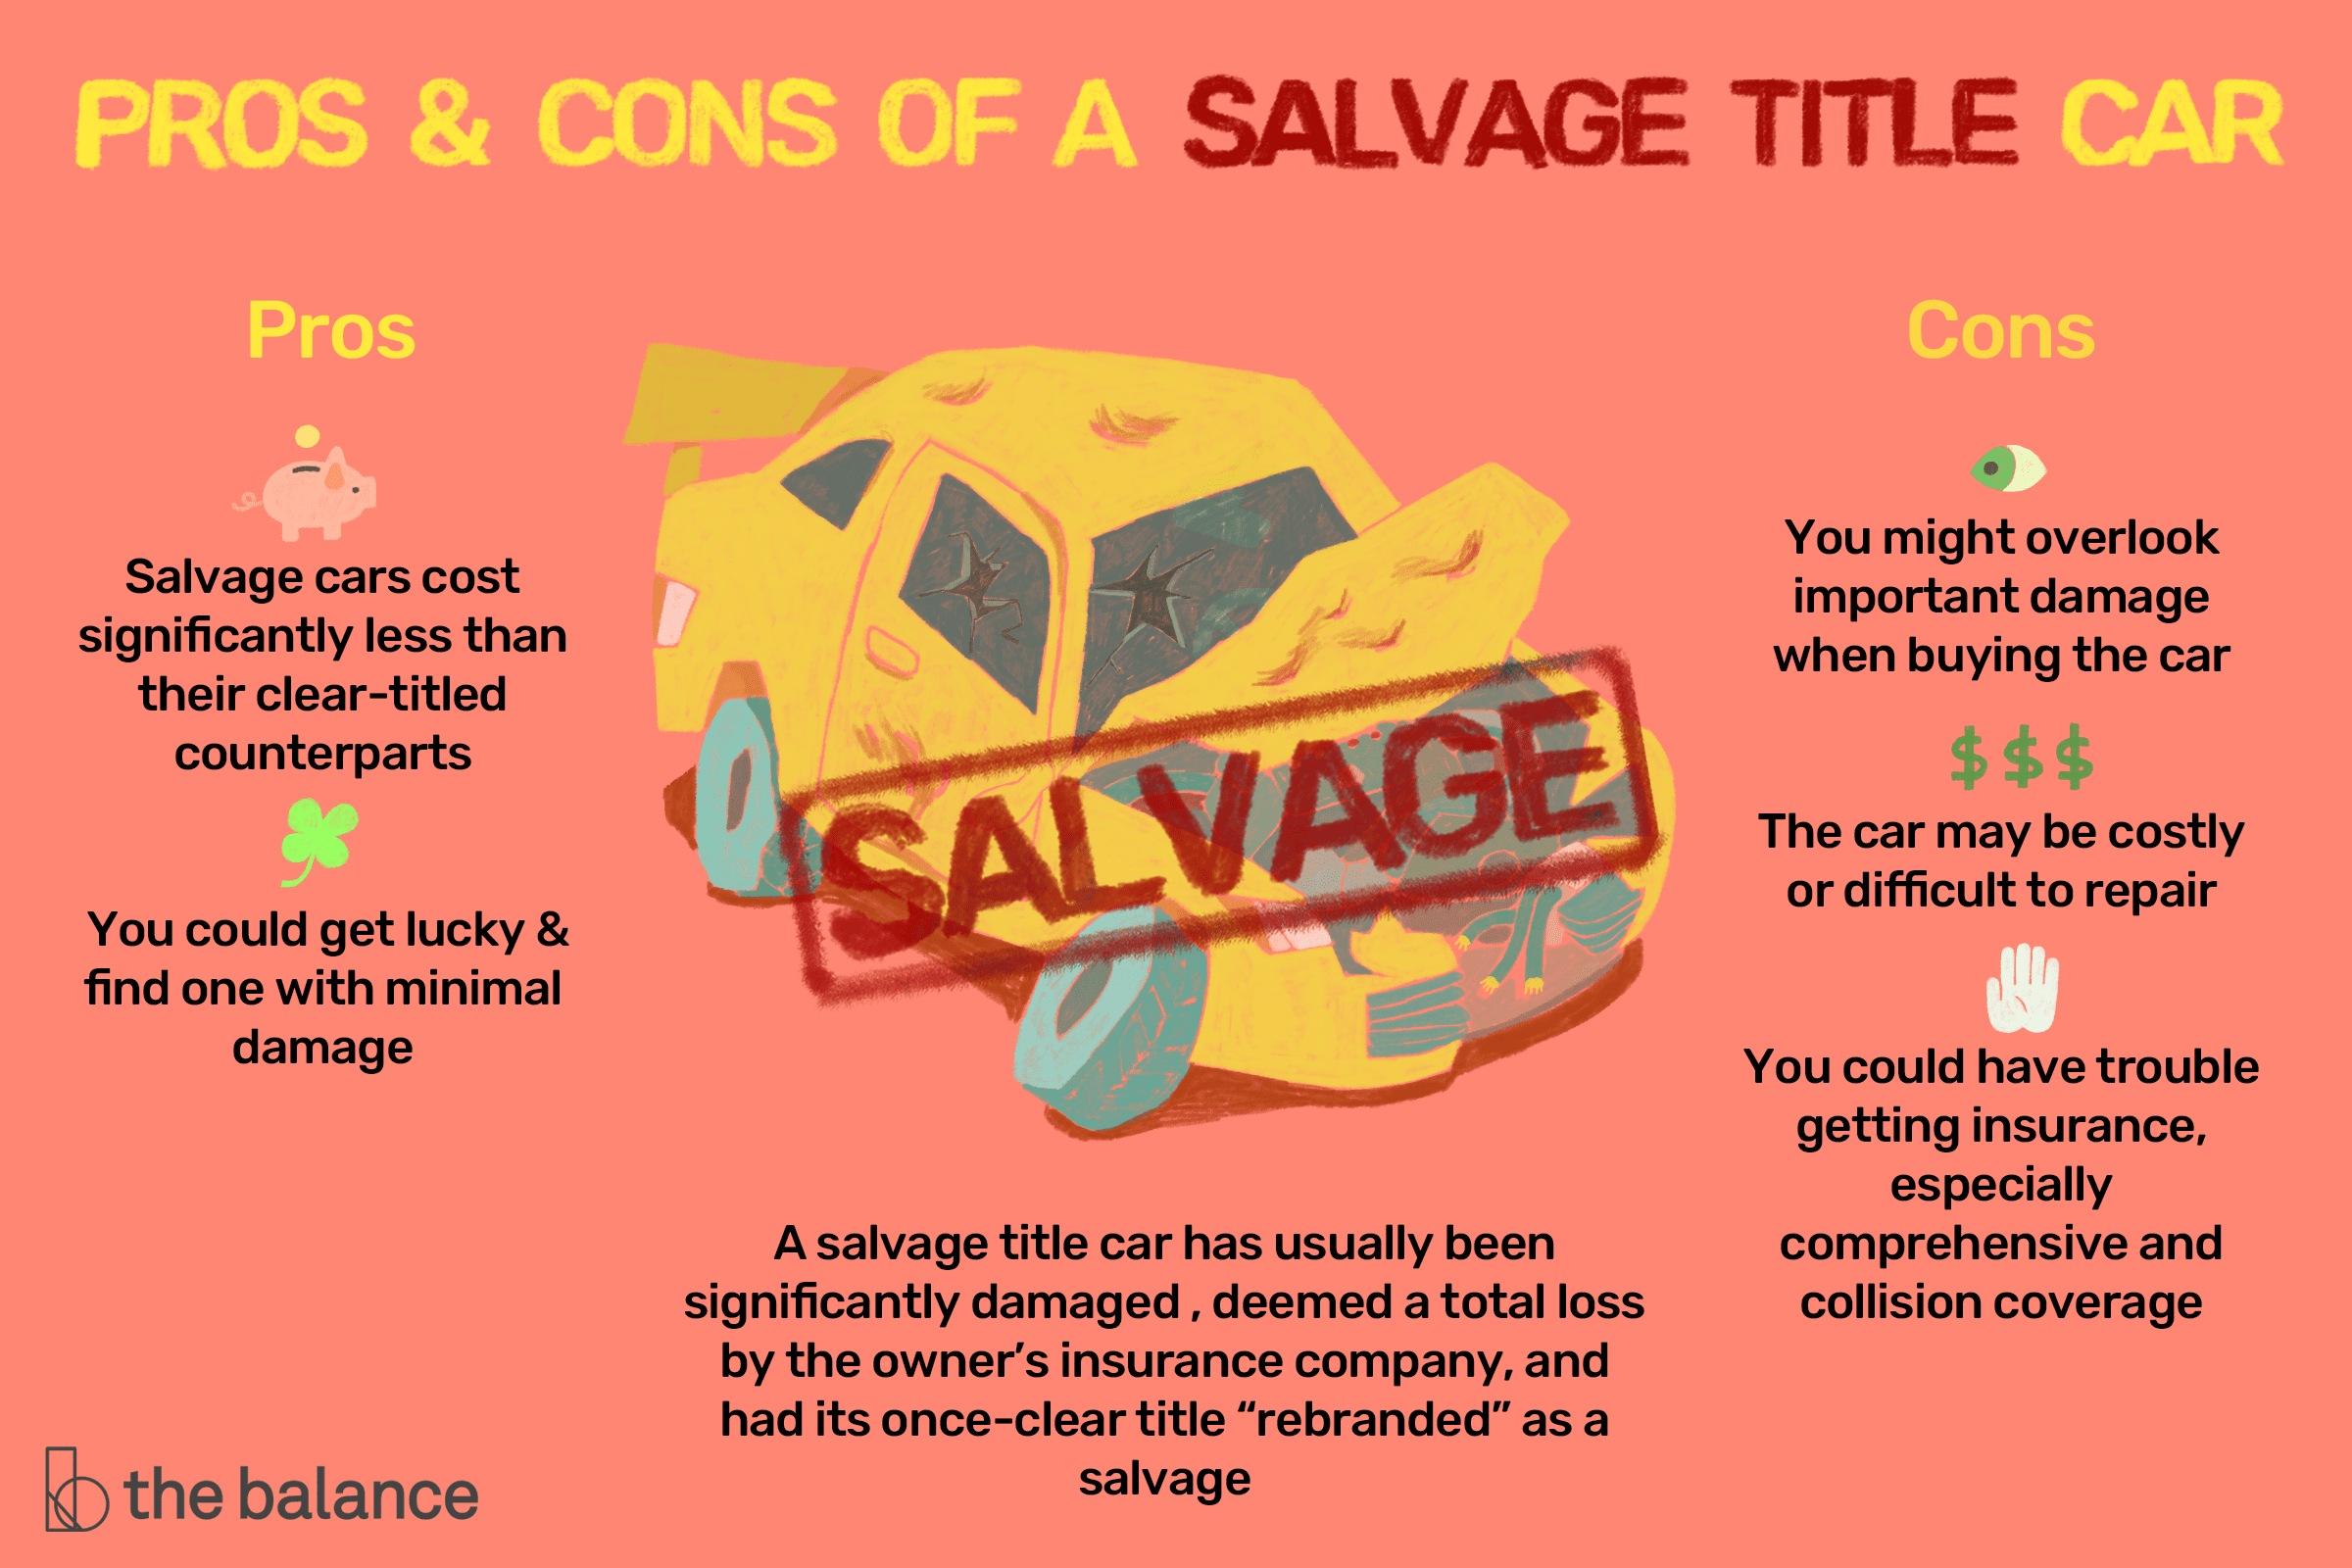 Pros and Cons of a Salvage Title Car